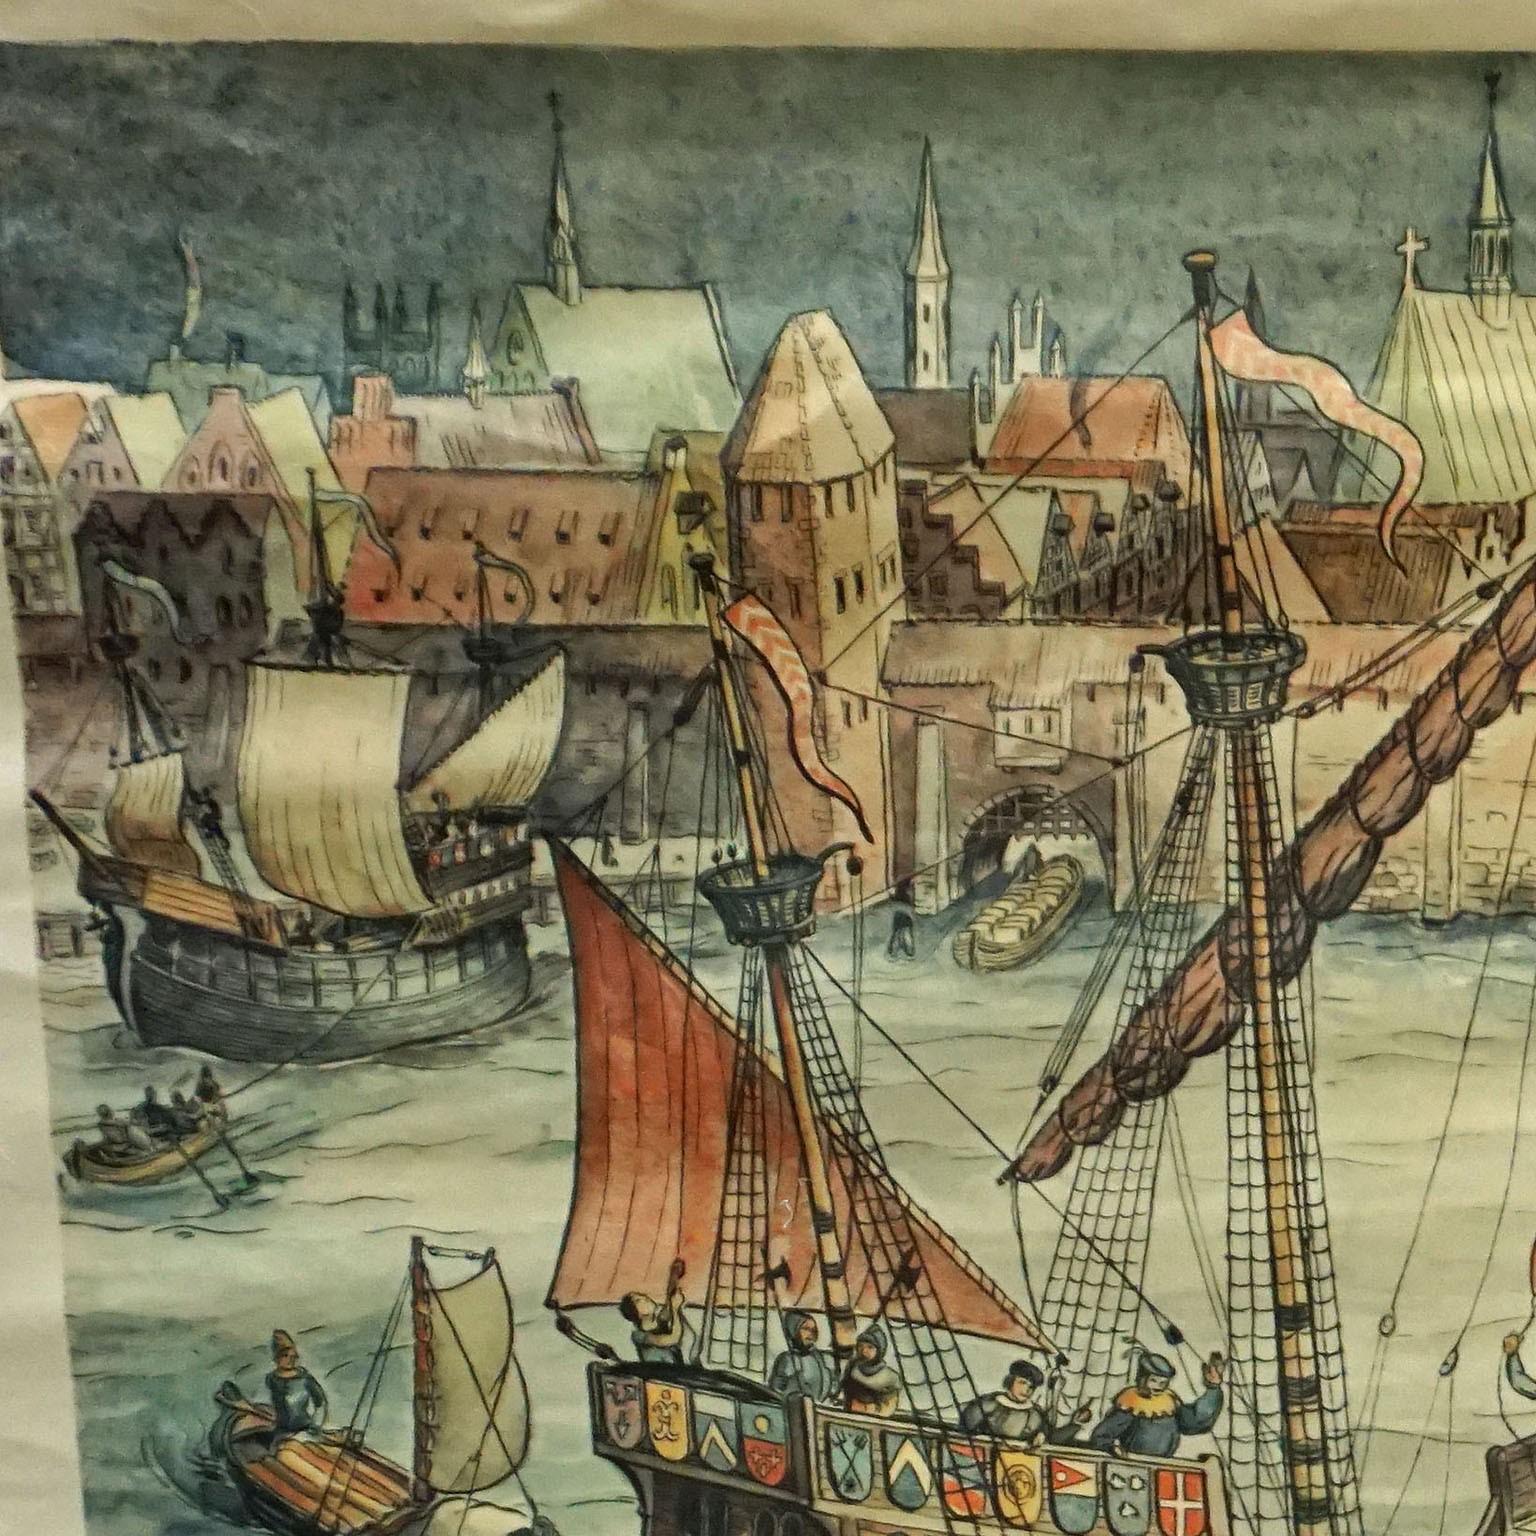 The maritime look vintage pull-down wall chart shows the historical picture of a port of an ancient trading city, published by Verlag Dr. te. Neues & Co., GmbH. Colorful print on paper reinforced with canvas.
Measurements:
Width 100 cm (39.37